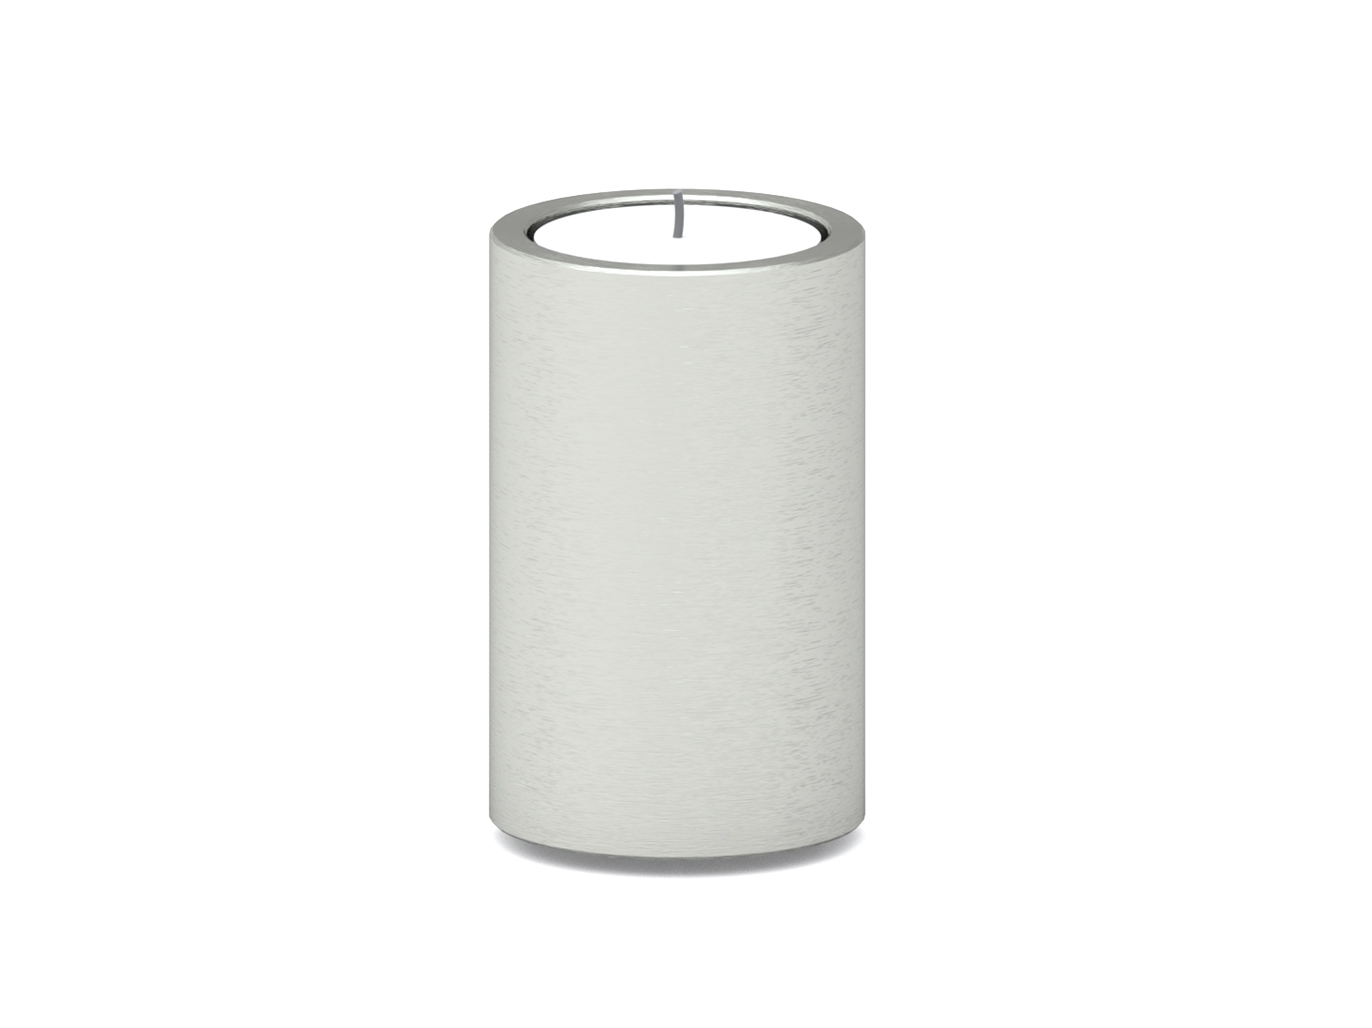 RVS Urn CANDLE  50